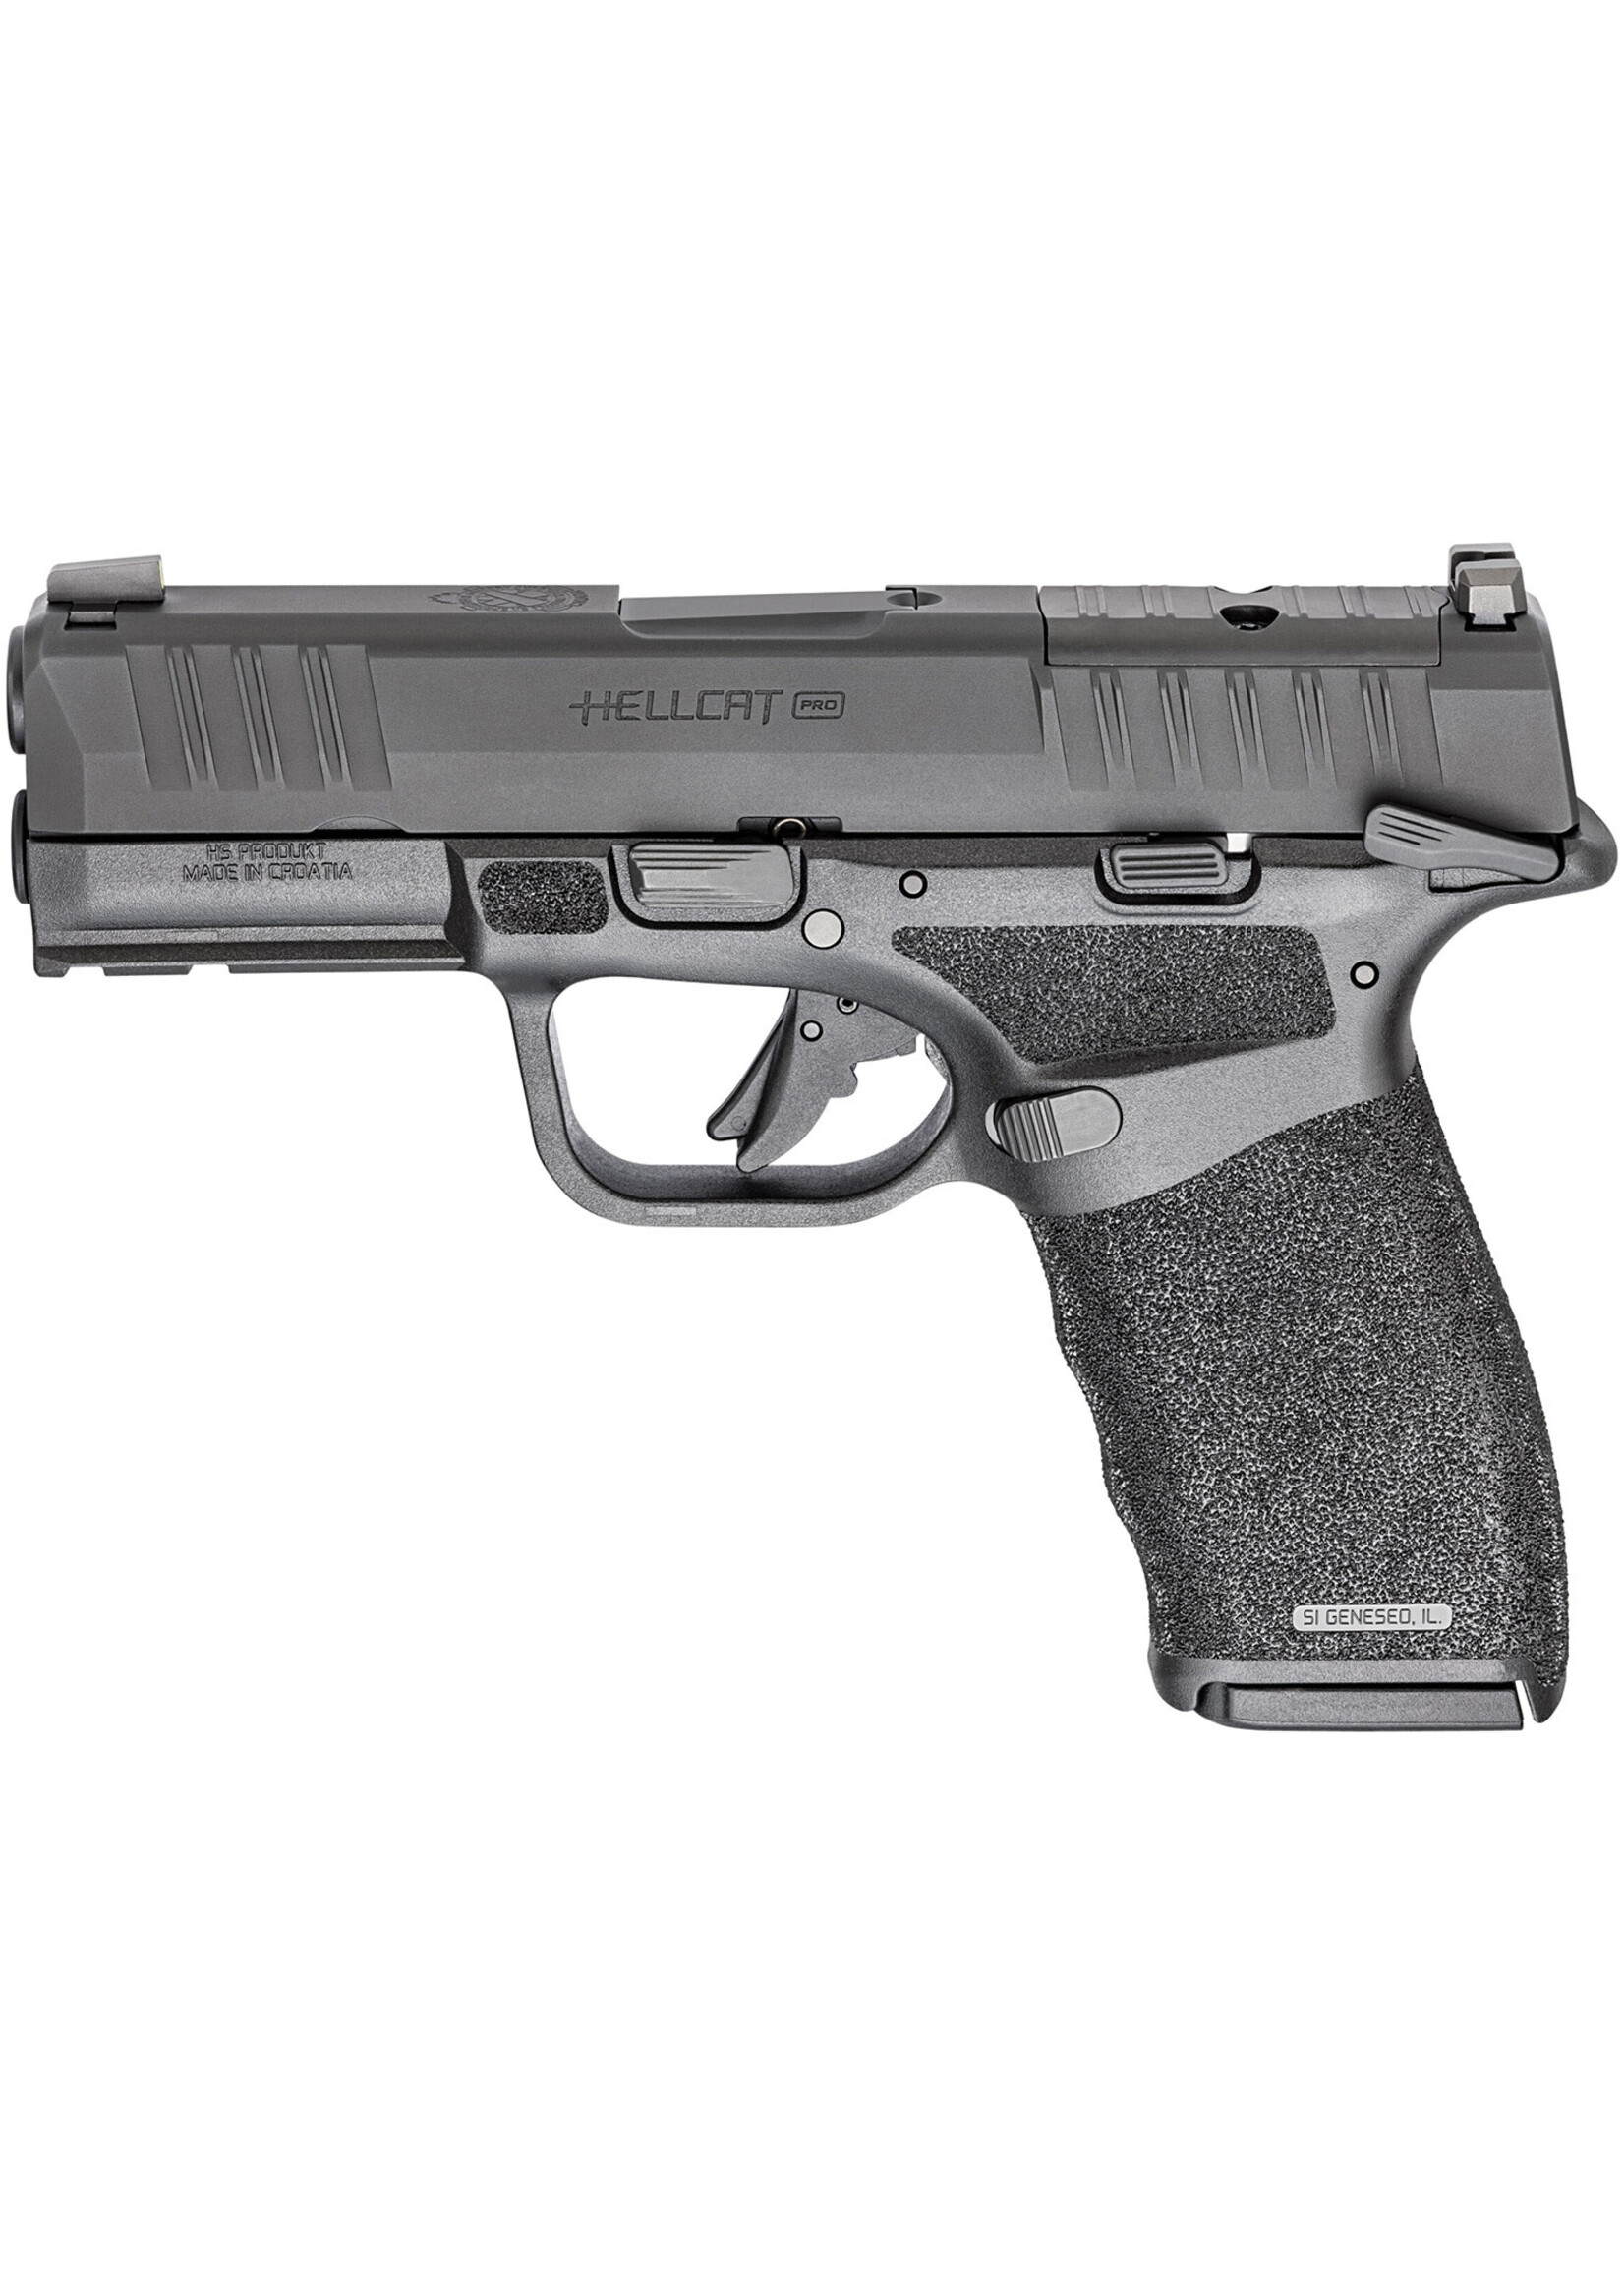 Springfield Armory SPECIAL ORDER Springfield Armory  Hellcat Pro OSP Gear Up Package, Compact 9mm Luger 15+1, 3.70" Black Melonite Hammer Forged Barrel, Black Melonite Optic Ready/Serrated Slide, Black Polymer Frame w/Picatinny Rail, Adaptive Textured Polym